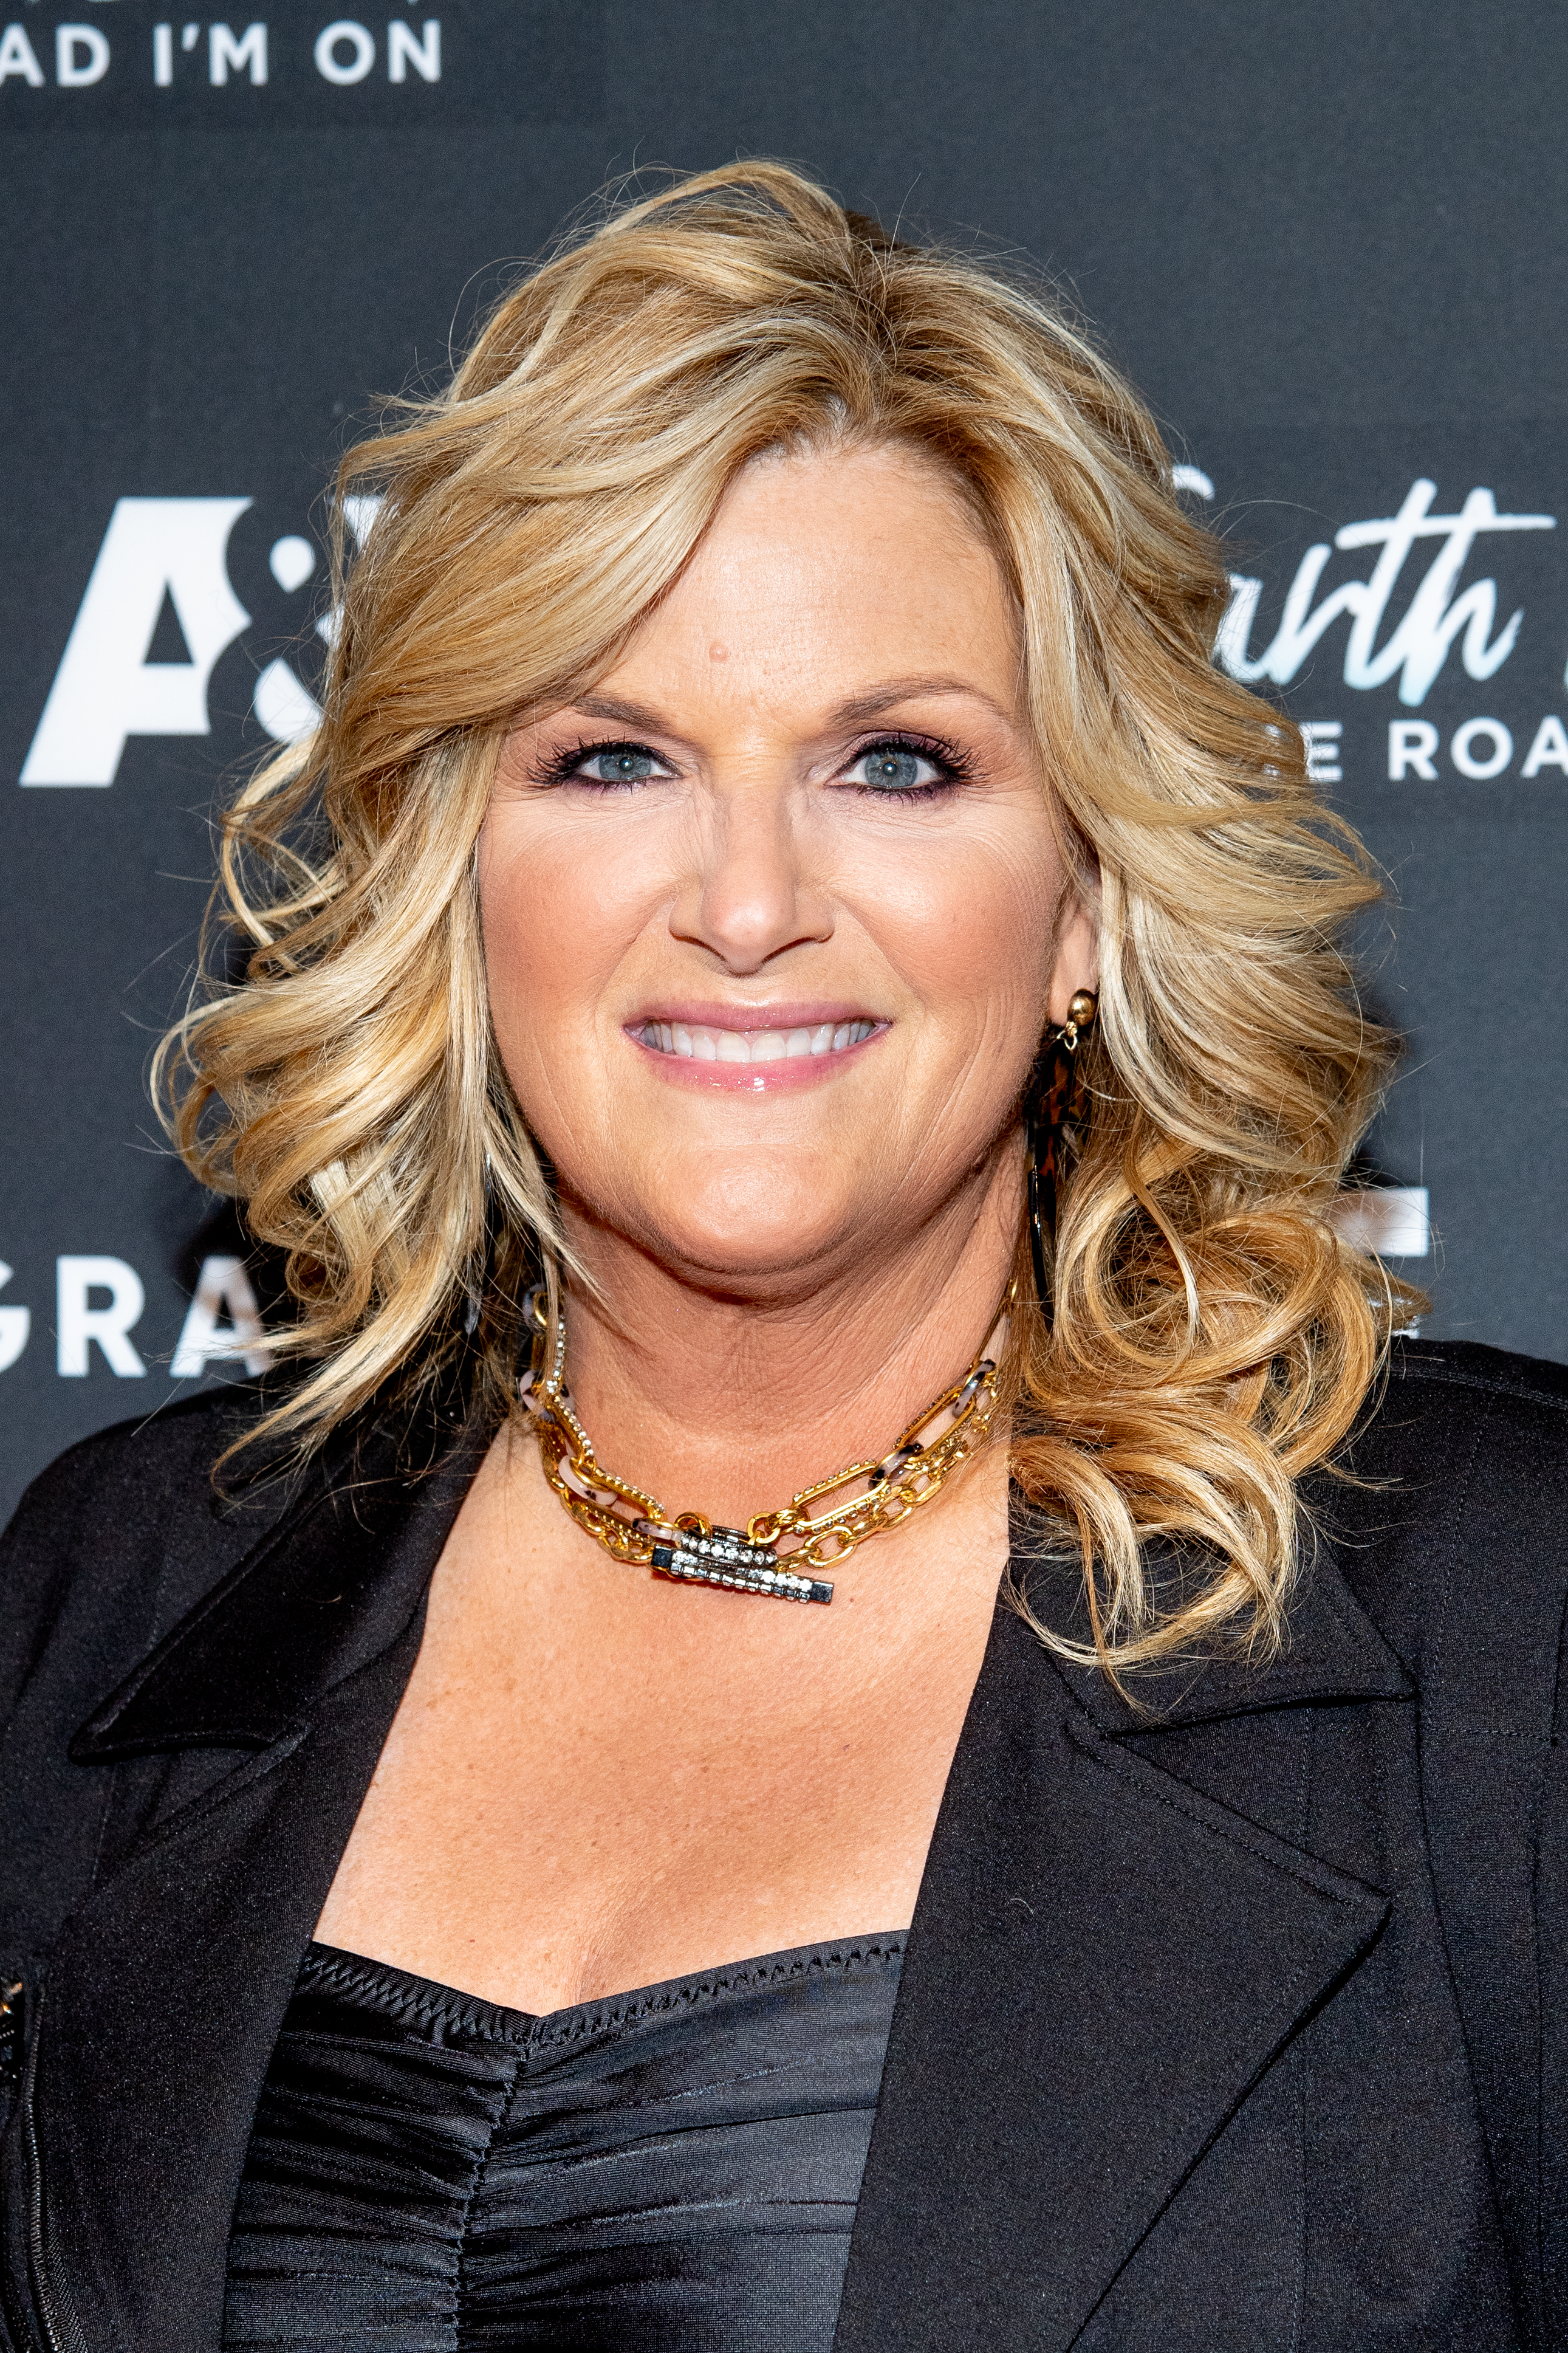 Trisha Yearwood at the "Garth Brooks: The Road I'm On" Biography Celebration in New York in 2019 | Source: Getty Images